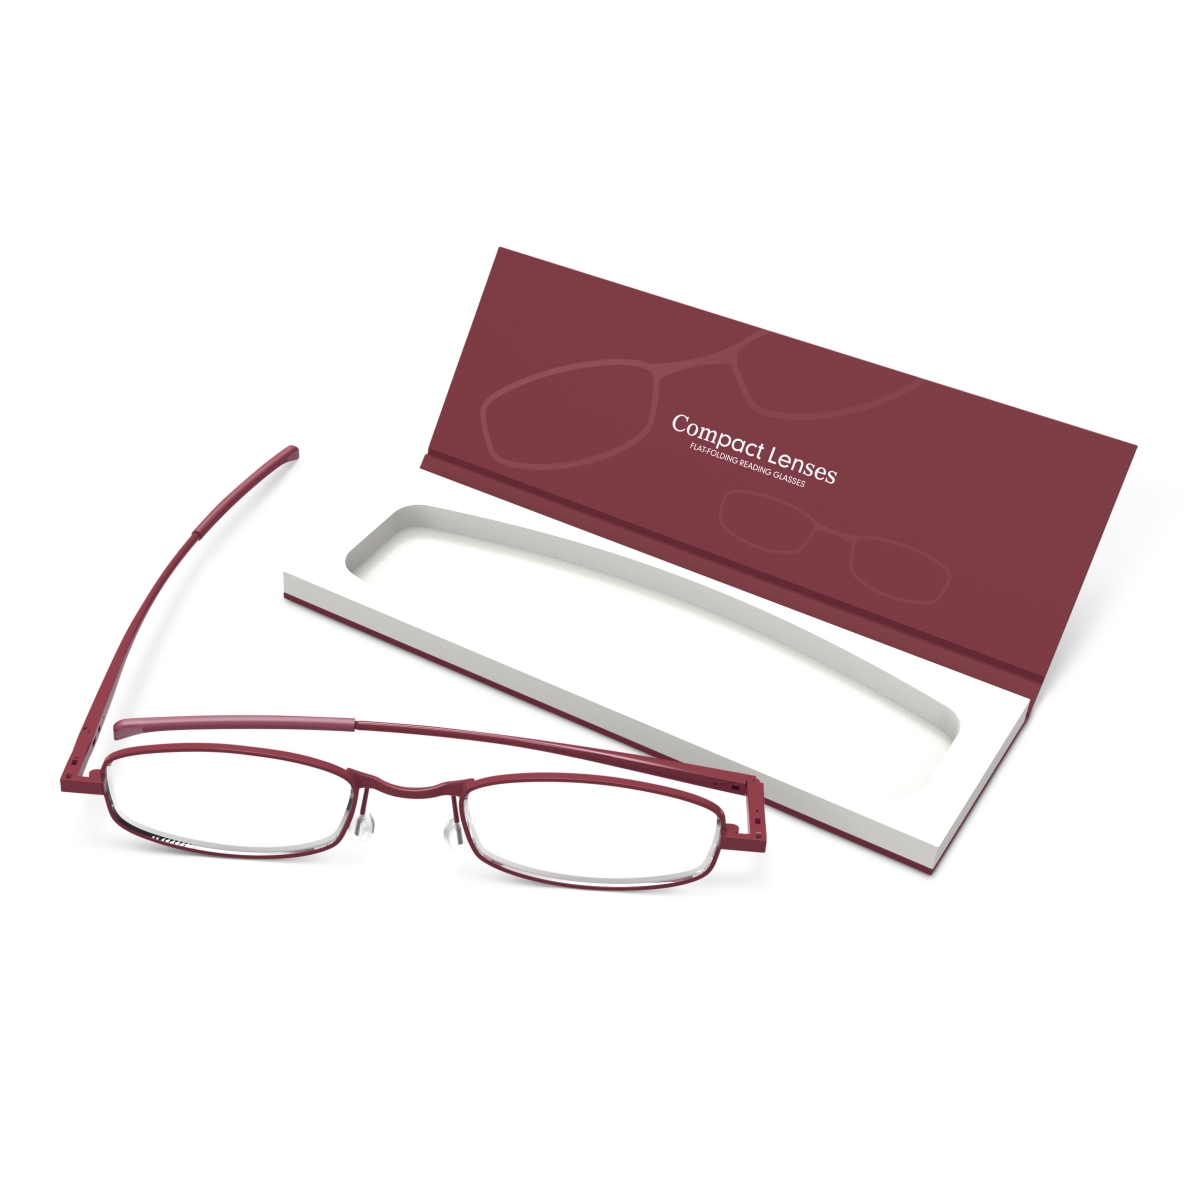 Picture of If USA 91732 Compact Lens Flat Folding Reading Glasses, Port - Plus 1.5